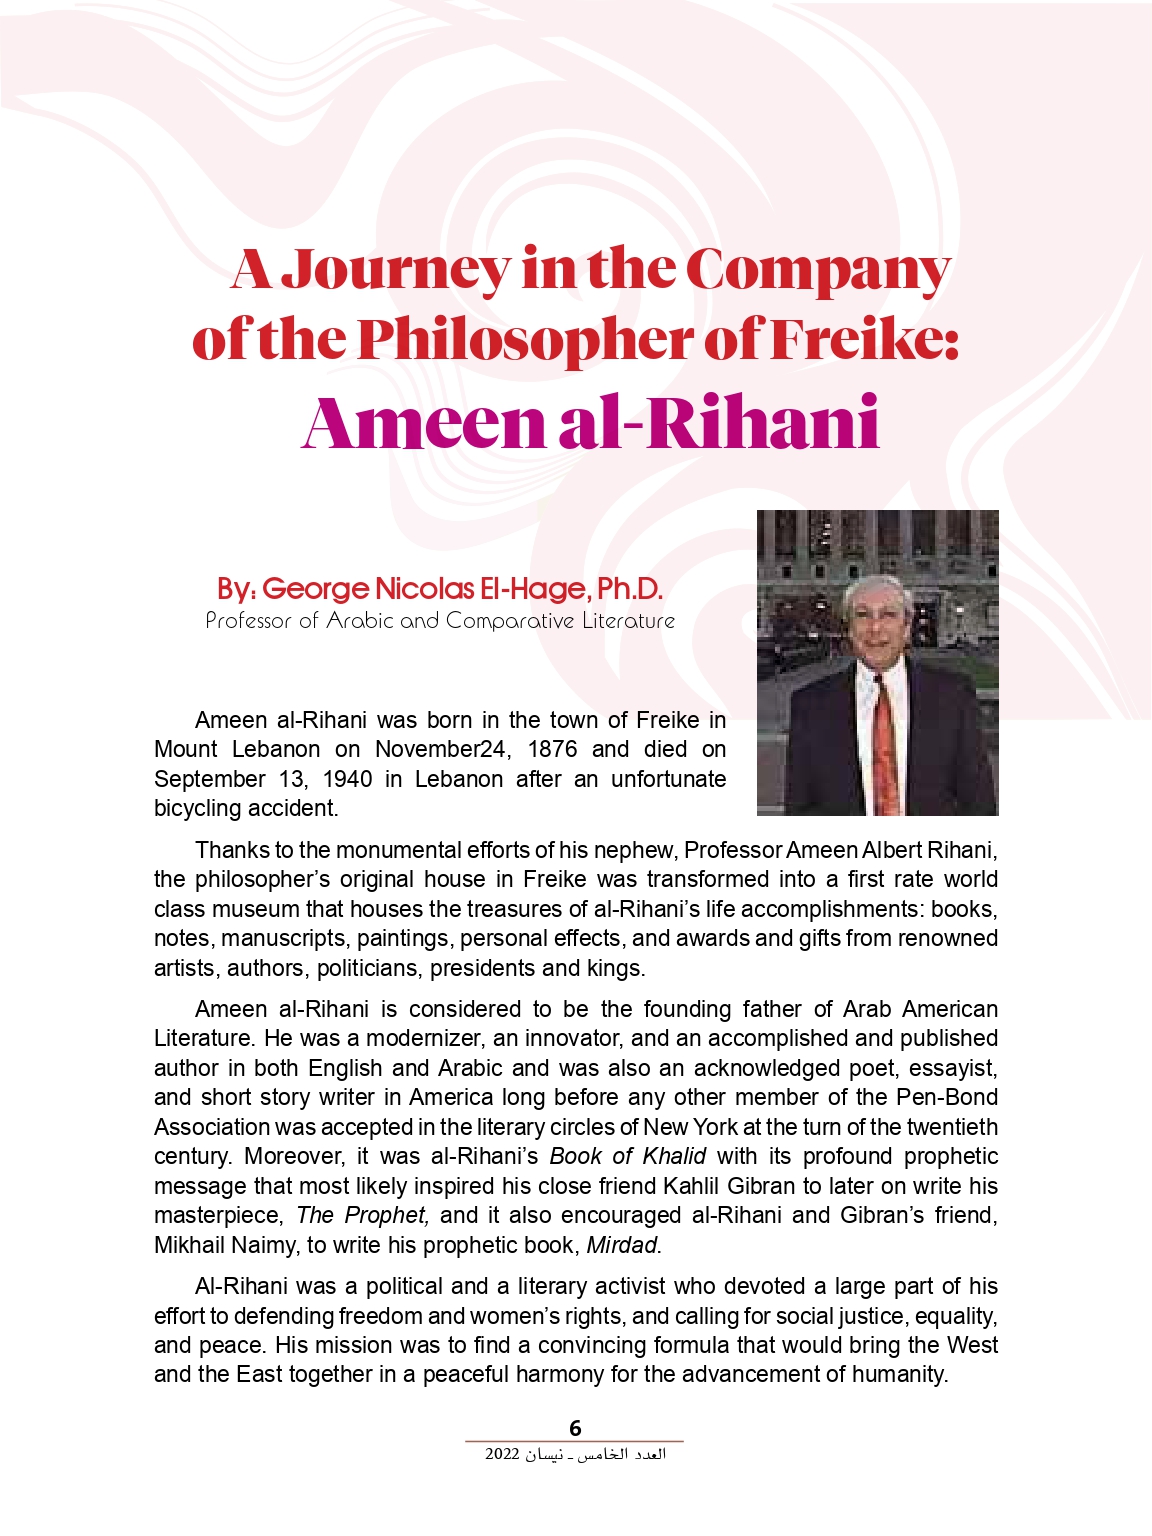 George Nicolas El-Hage, "A Journey in the Company of the Philosopher of Freike: Ameen al-Rihani", Aqlam, issue 5, April 2022, pp. 6-25.